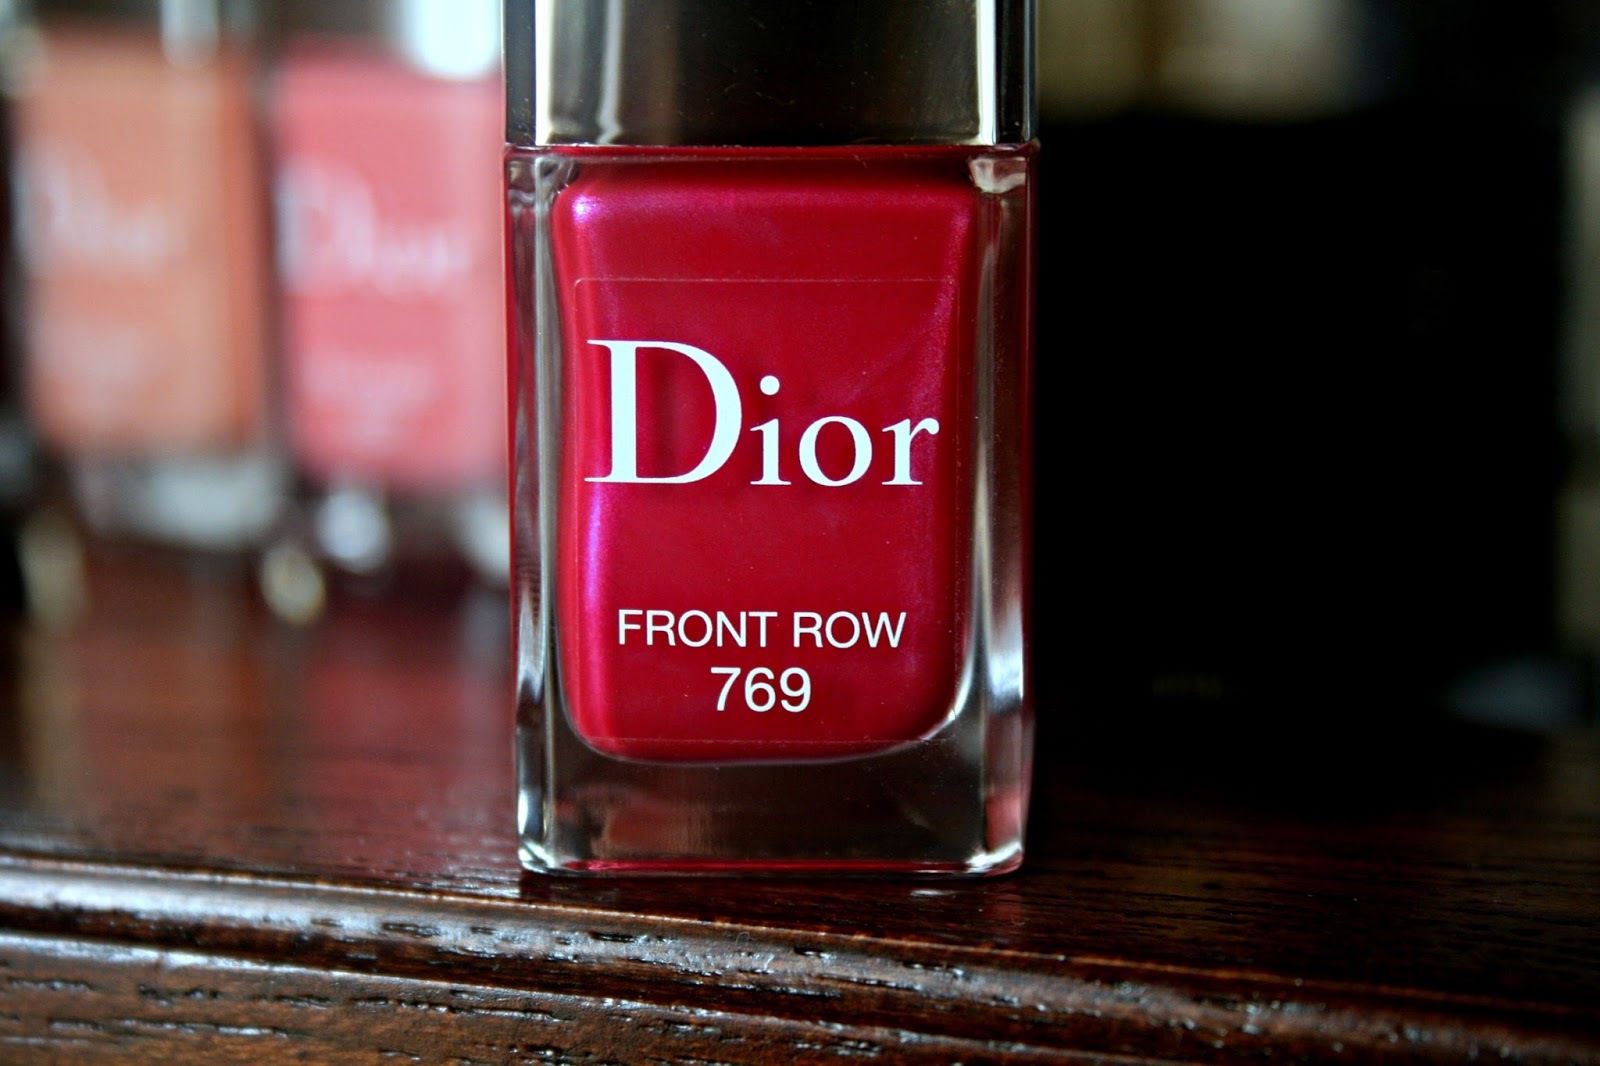 Dior Vernis Couture Colour Gel Shine and Long Wear Nail Lacquer Front Row 769 